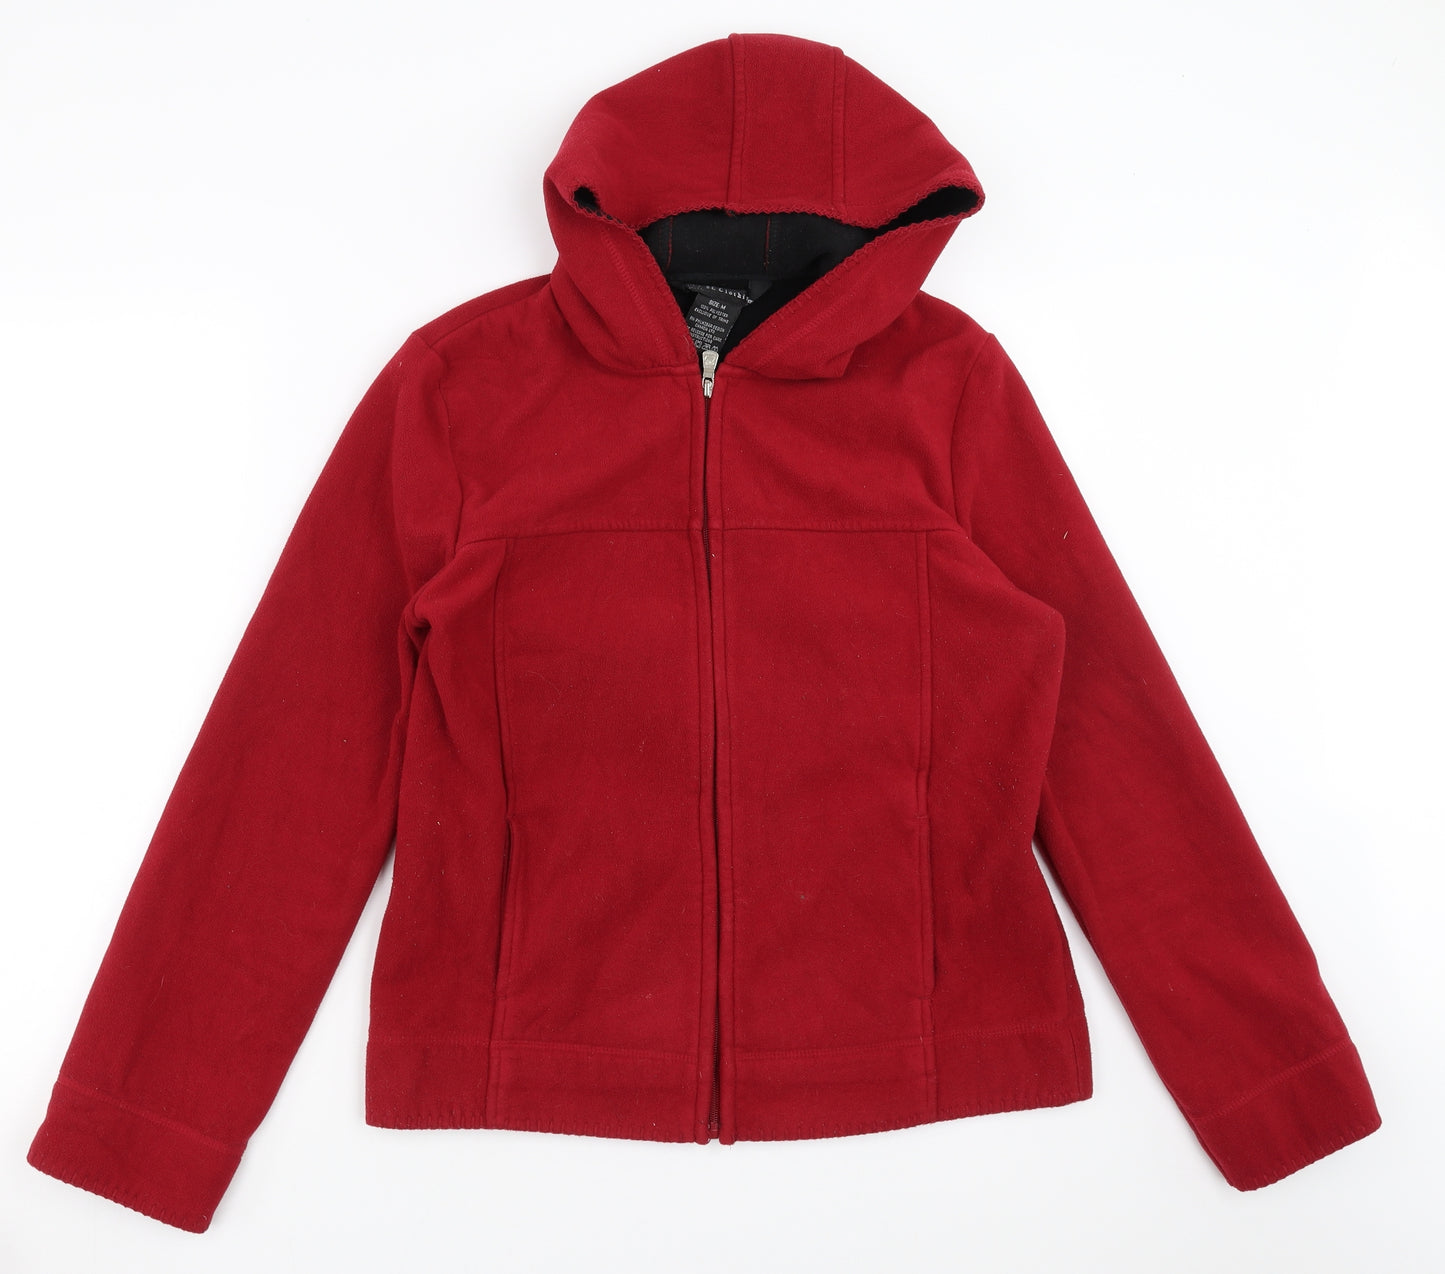 BC Clothing Womens Red  Fleece Jacket  Size M